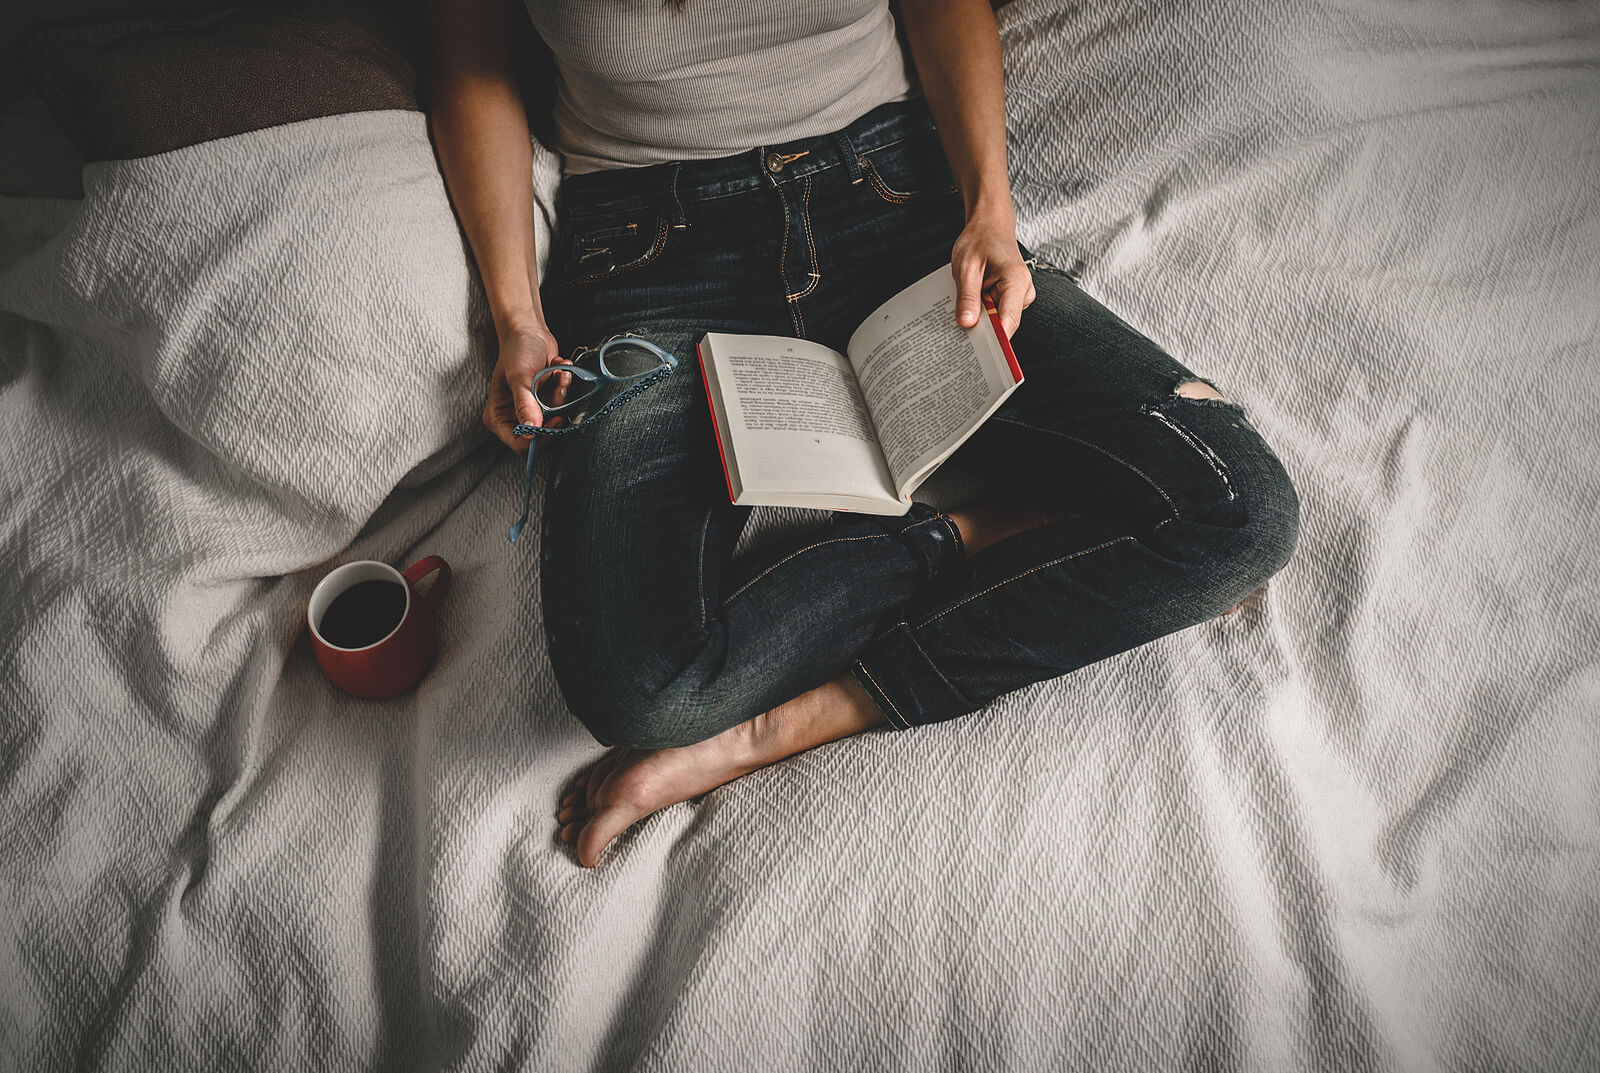 A woman reads a book while holding her glasses on a bed. Dealing with problems in your relationships due to Codependency in Austin, TX? A relational therapist in Texas might be what you need. Call today to learn more!